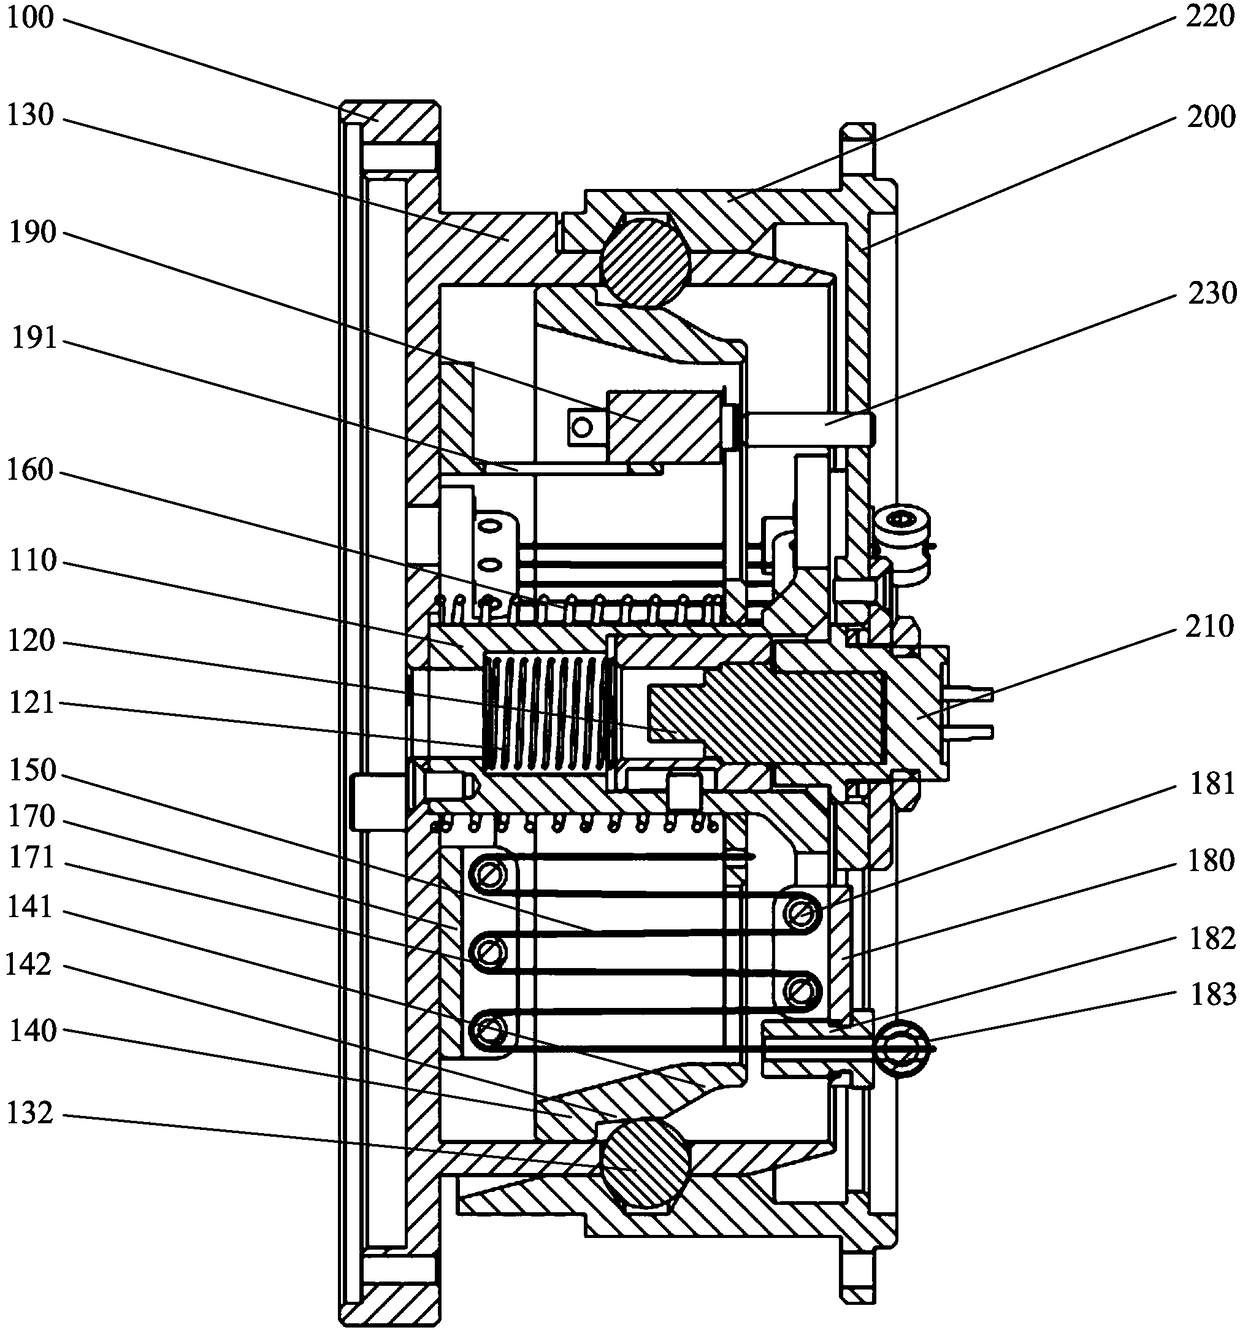 Memory-alloy-based quick-changing connector for reconfigurable manipulator